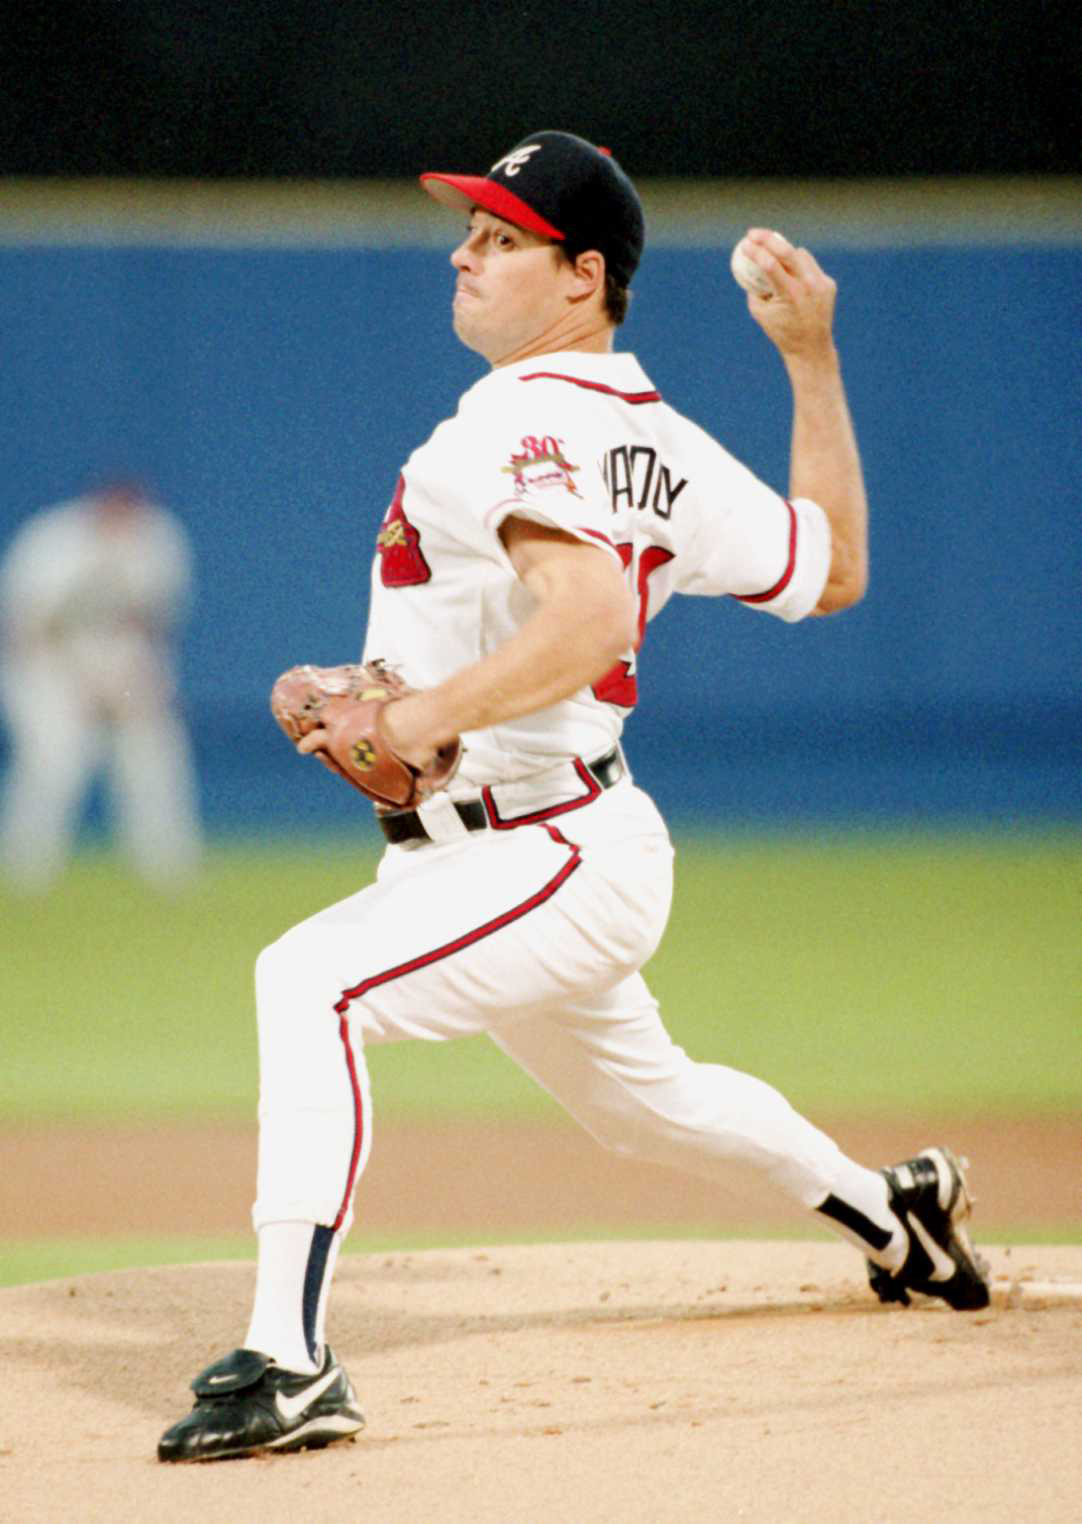 1995 World Series Braves: Maddux at mental best during title season